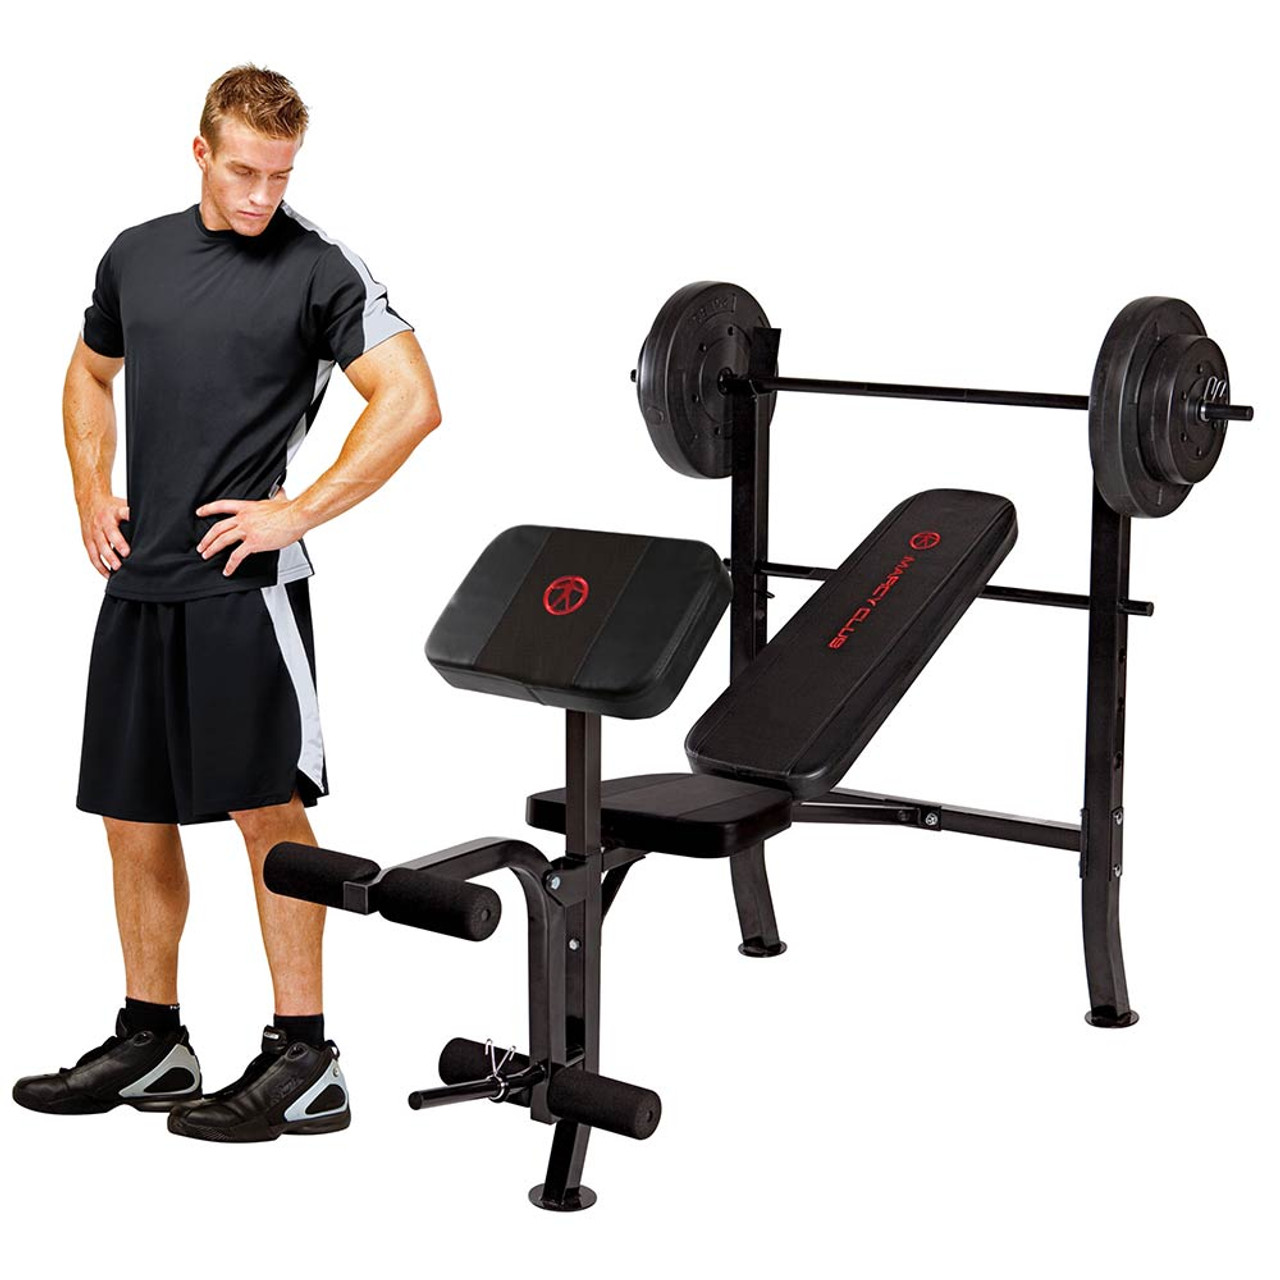 Marcy MKB2081 Standard Weight Bench for sale online 